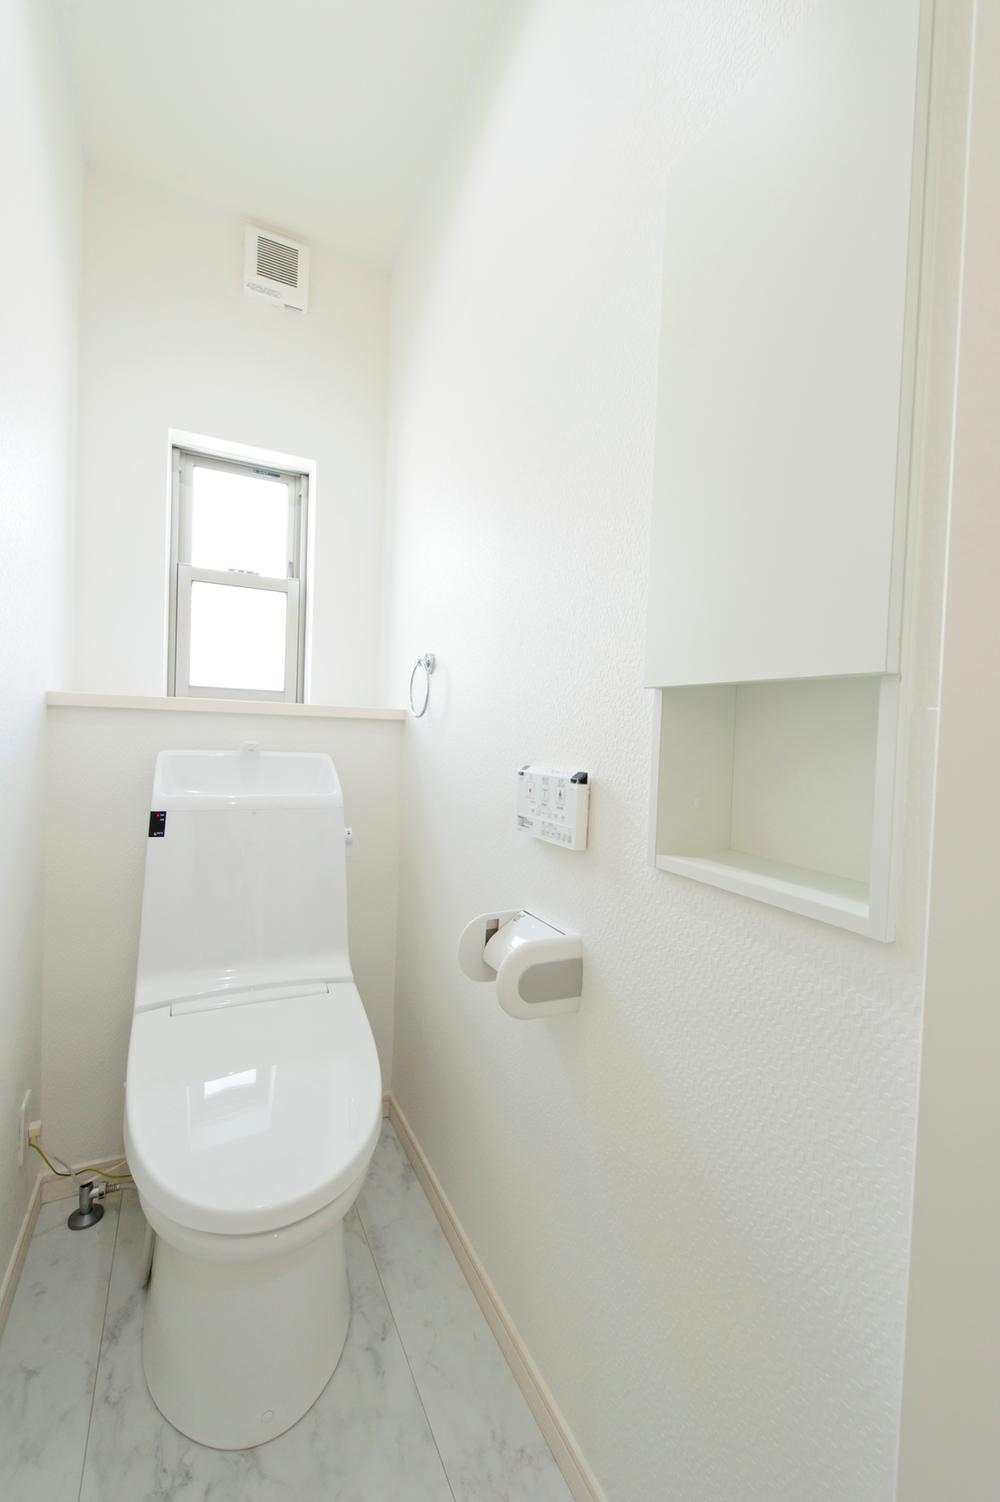 Same specifications photos (Other introspection). toilet ・ Same specifications Photos "Beshia" of INAX. It is a simple design. Shower toilet of super water-saving ECO5.  "Hyper Kira Mick" is also standard specification of cleaning Ease. 